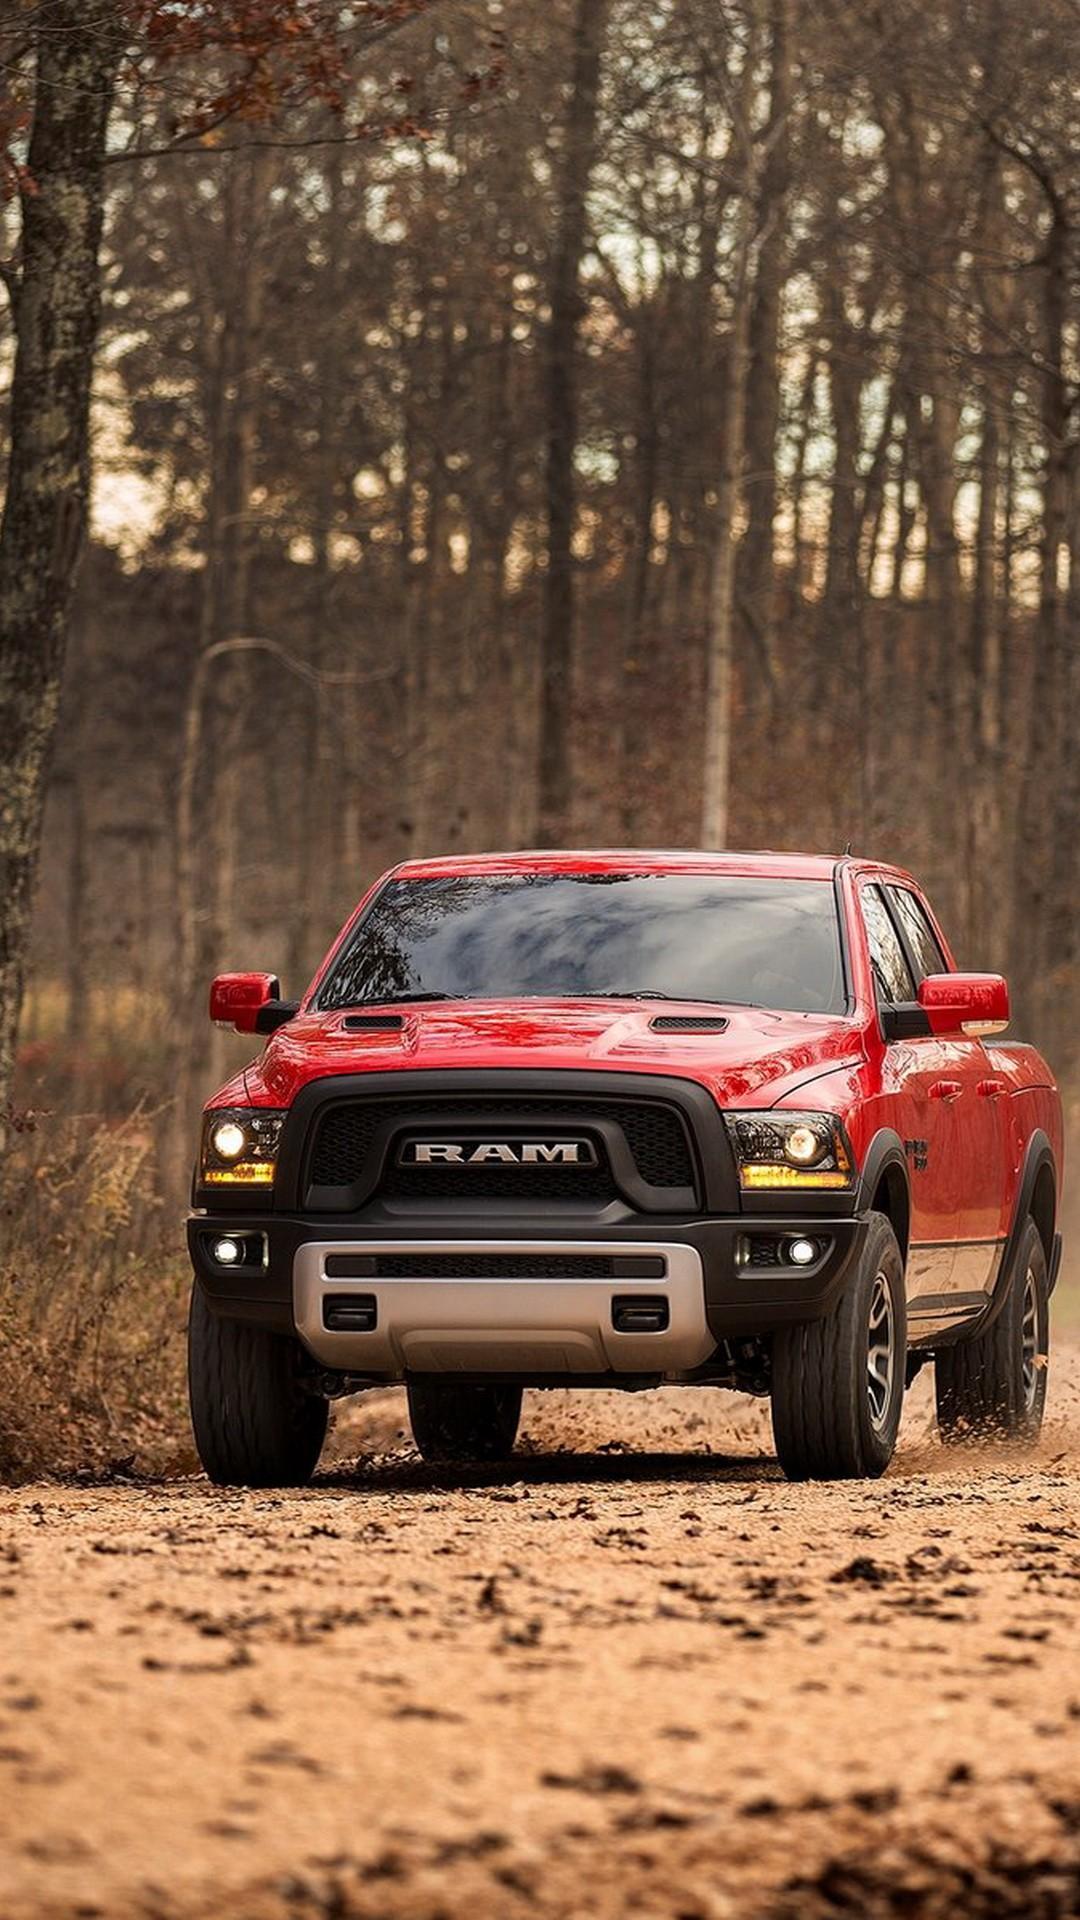 Dodge Ram iPhone Wallpaper Group , Download for free